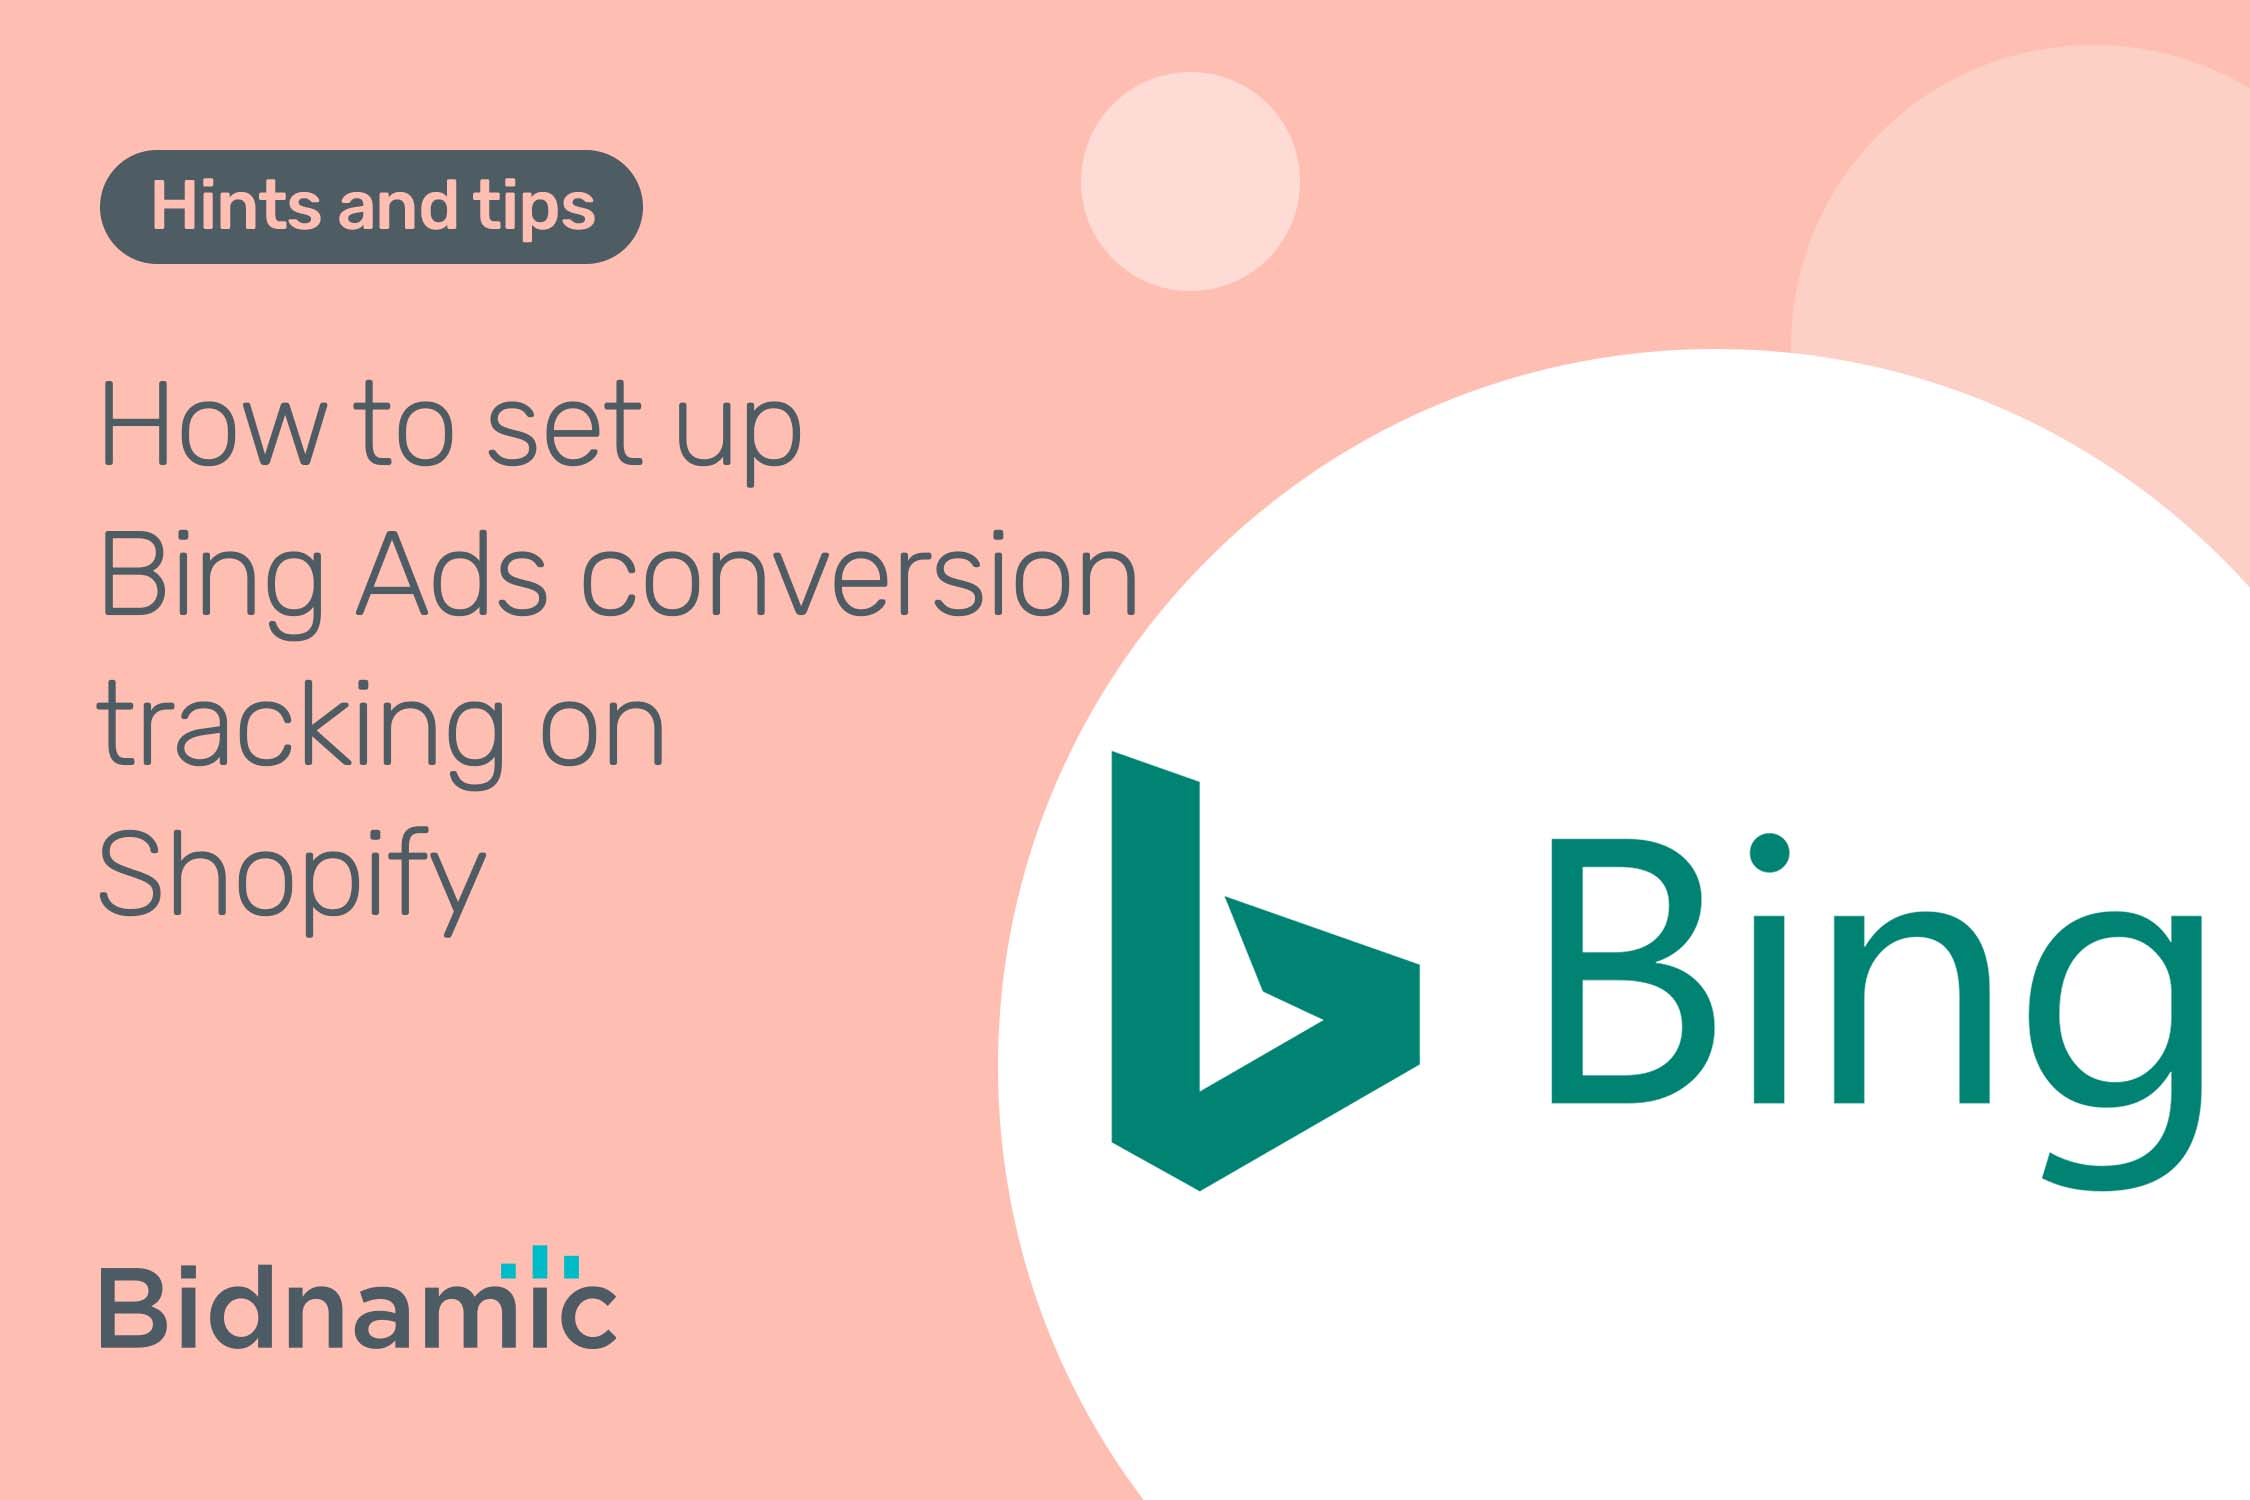 How to set up Bing Ads conversion tracking on Shopify